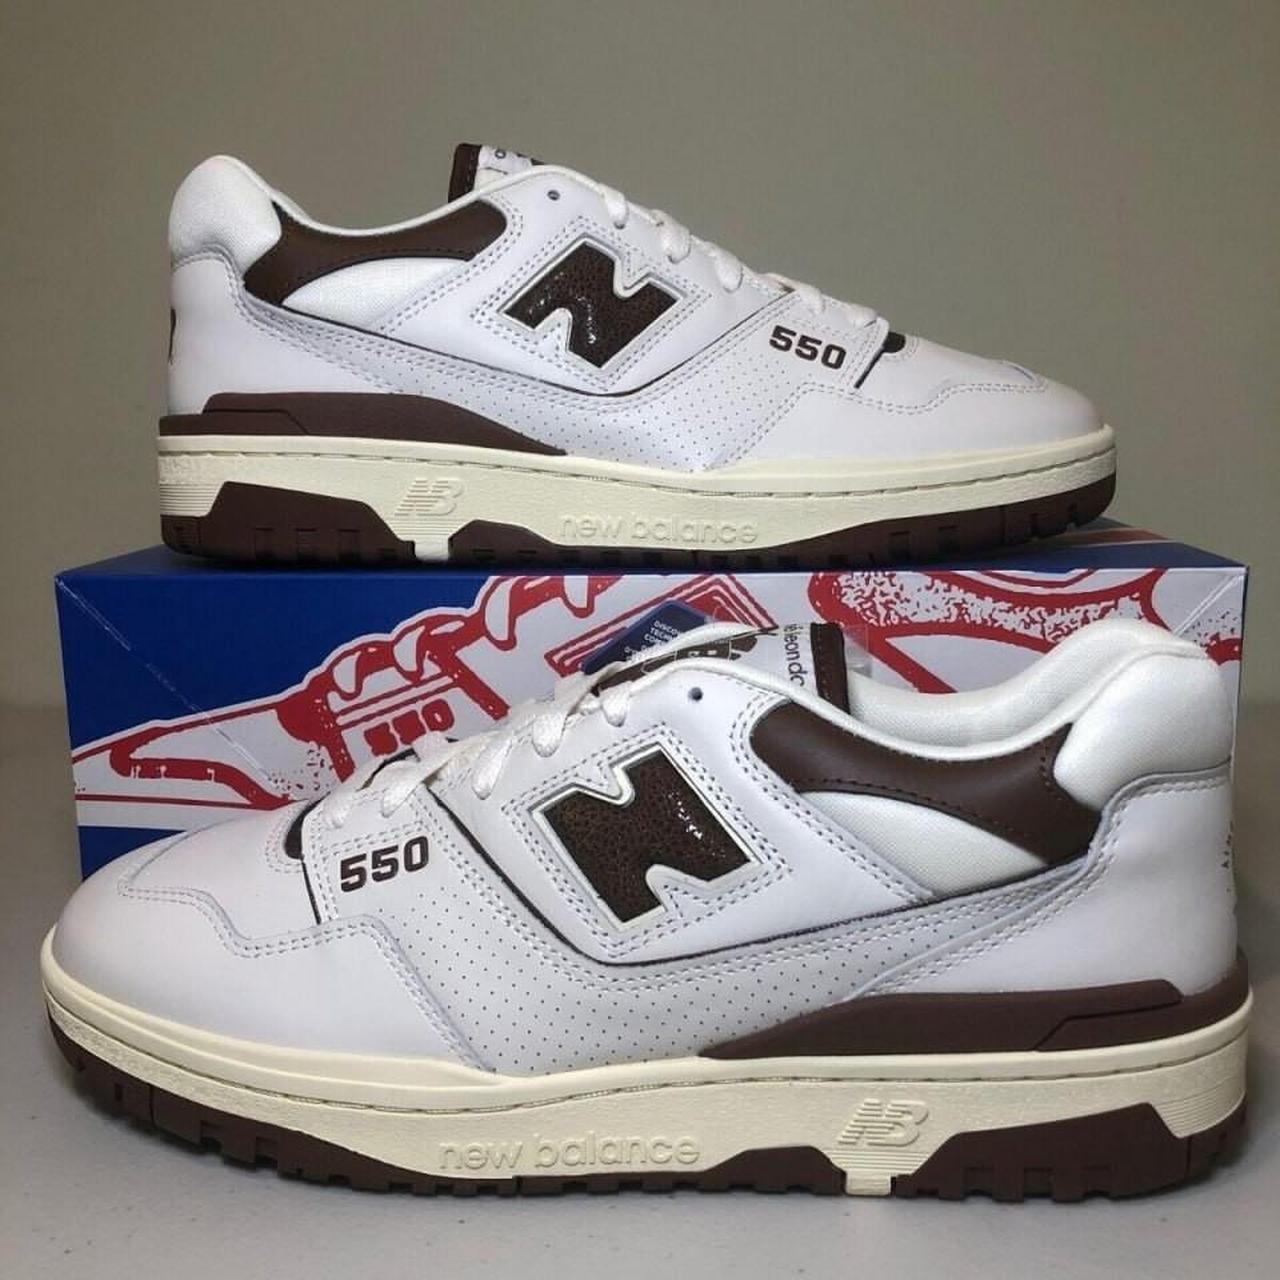 New Balance Women's White and Brown Trainers | Depop